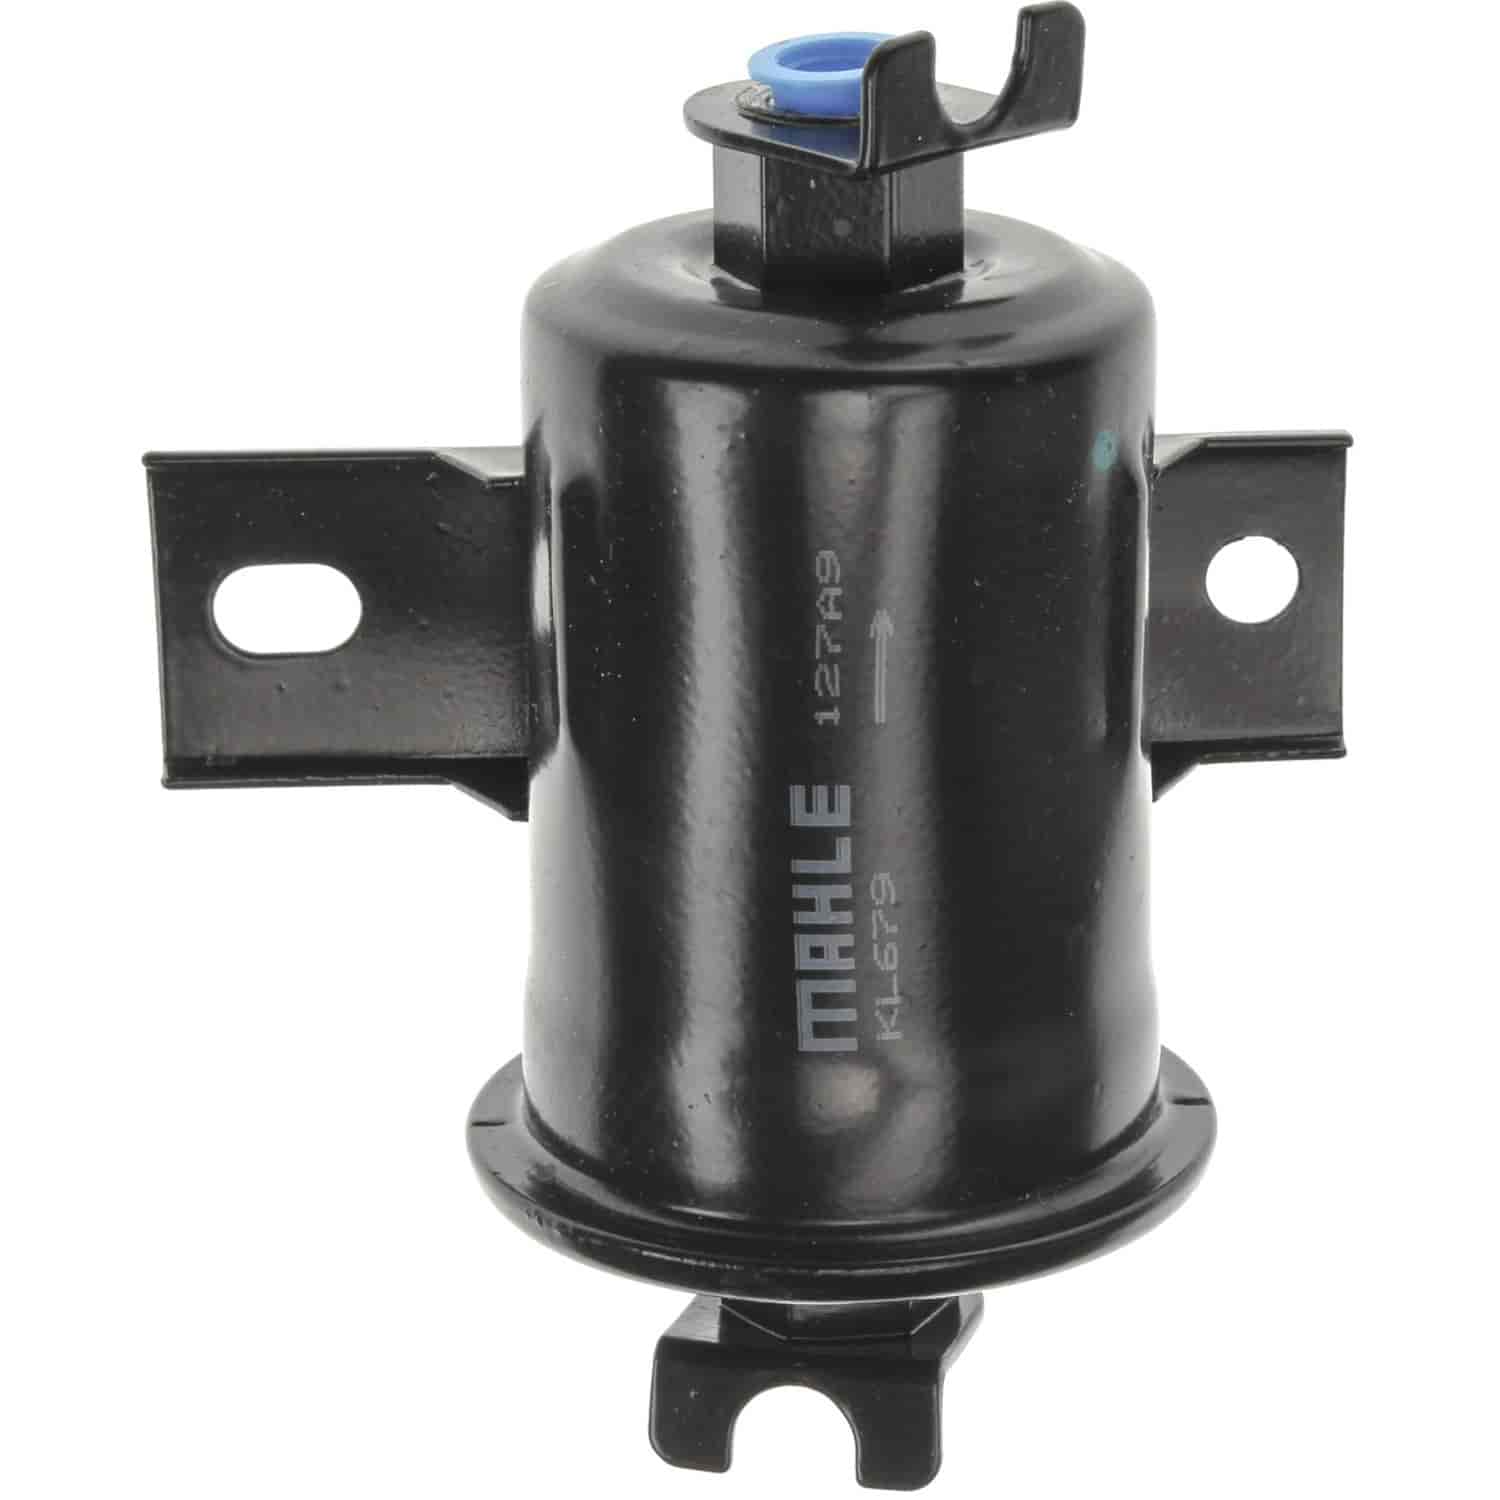 Mahle Fuel Filter Toyota Celica 85 Truck 85-86 89-95